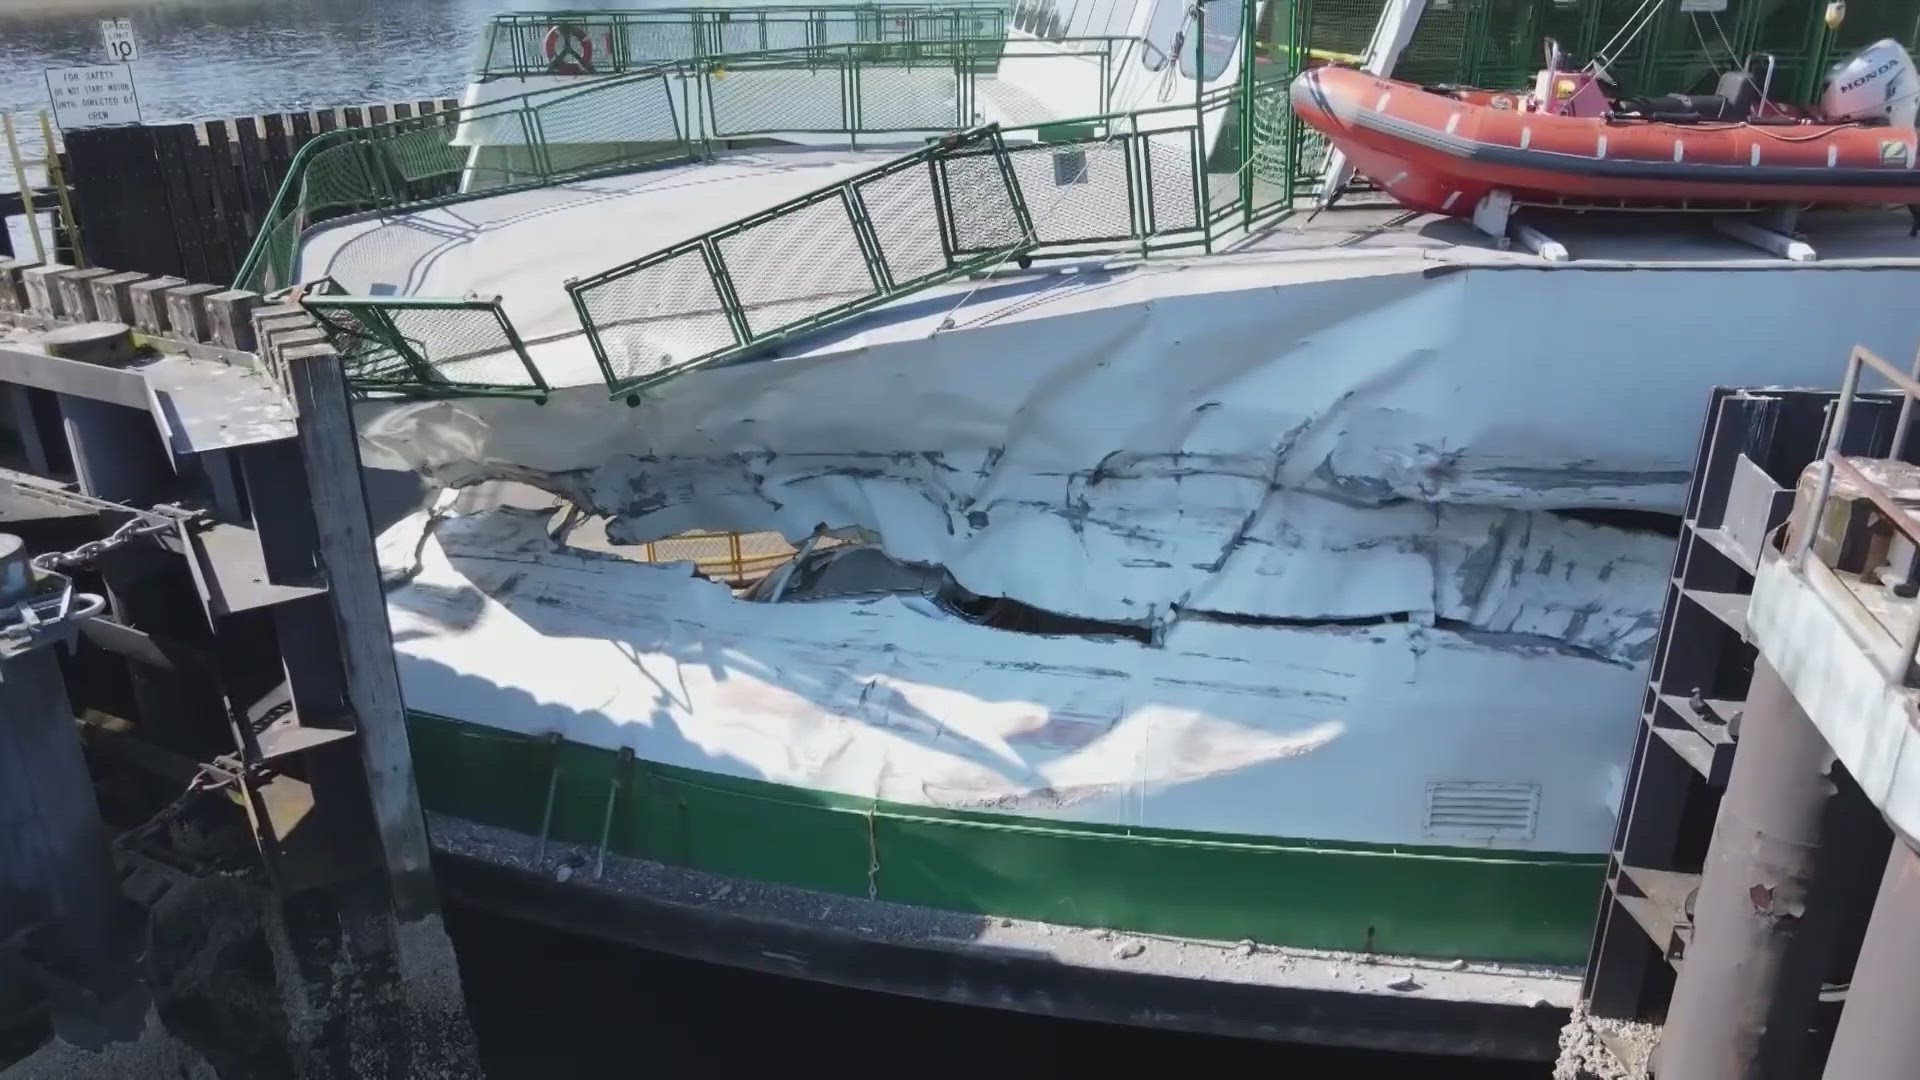 The captain of the Cathlamet ferry lost "situational awareness" before the vessel collided with an offshore dolphin at the Fauntleroy ferry terminal in July of 2022.